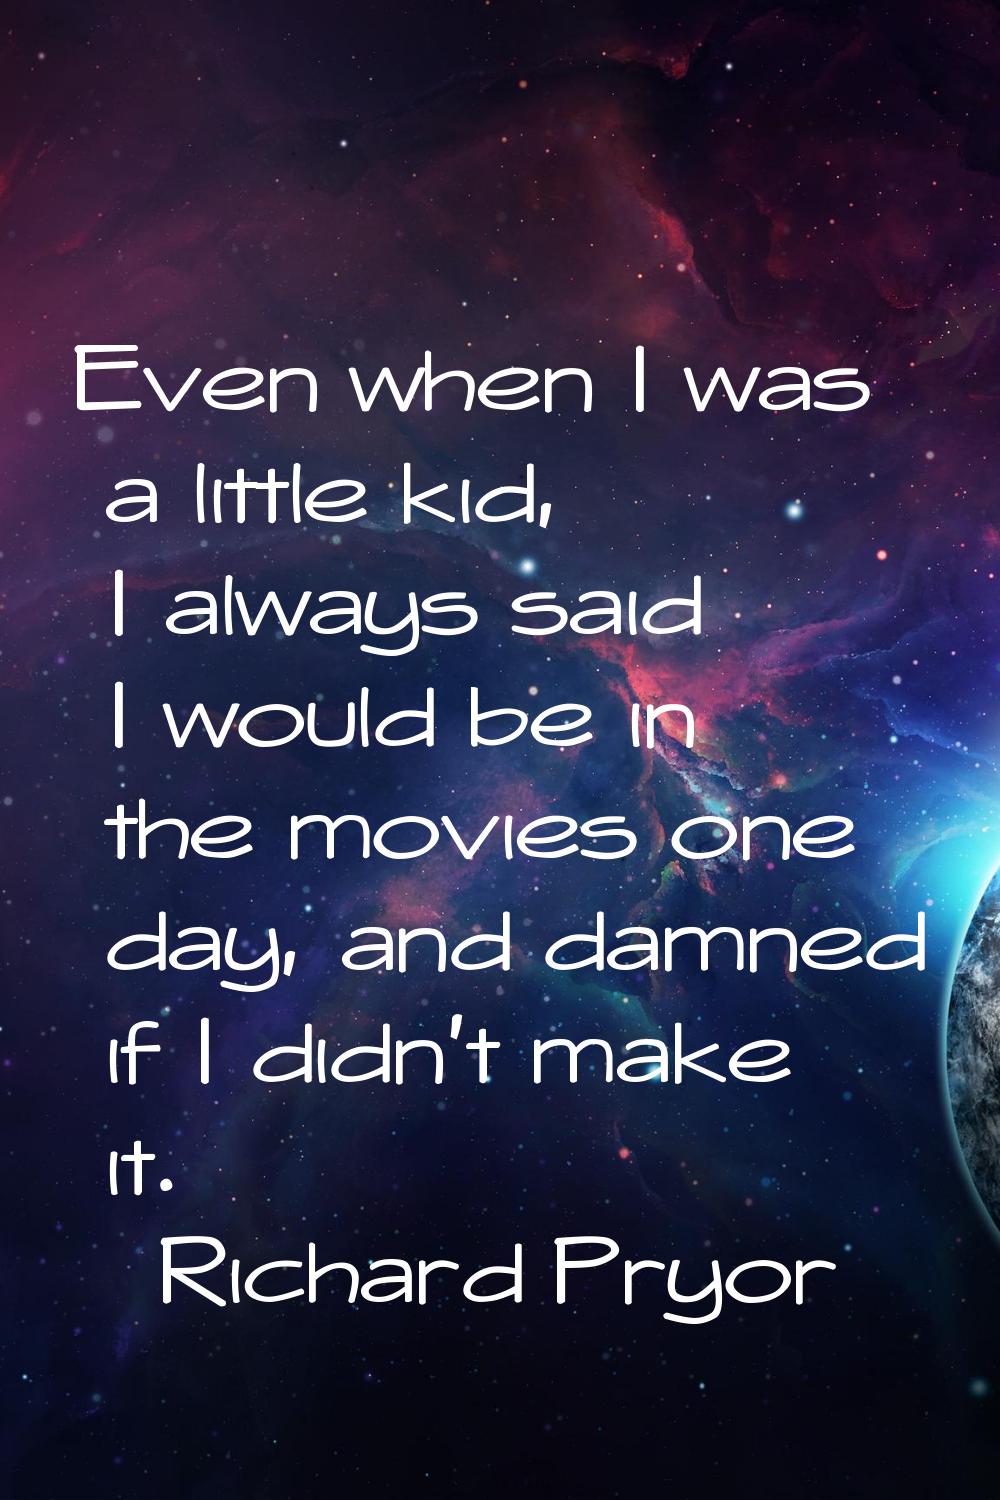 Even when I was a little kid, I always said I would be in the movies one day, and damned if I didn'